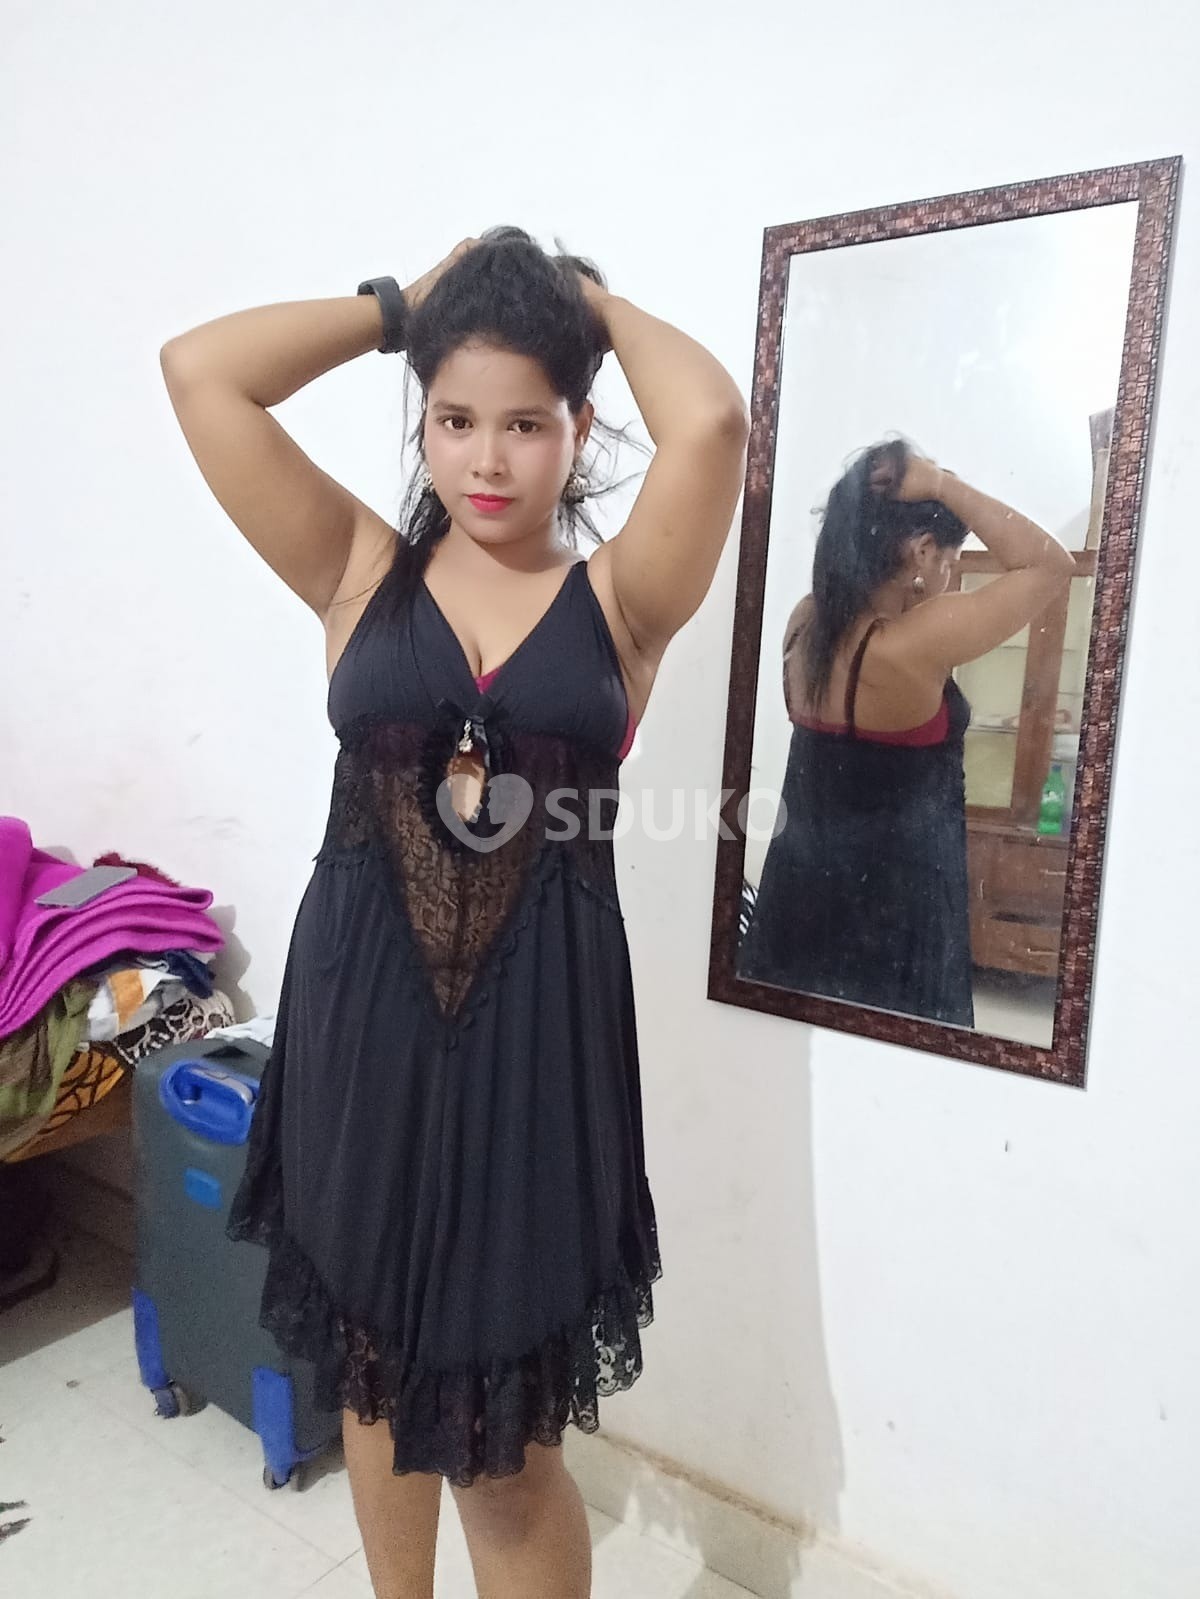 Jabalpur myself komal best VIP independent call girl service all type sex available aunty and college girl available ful